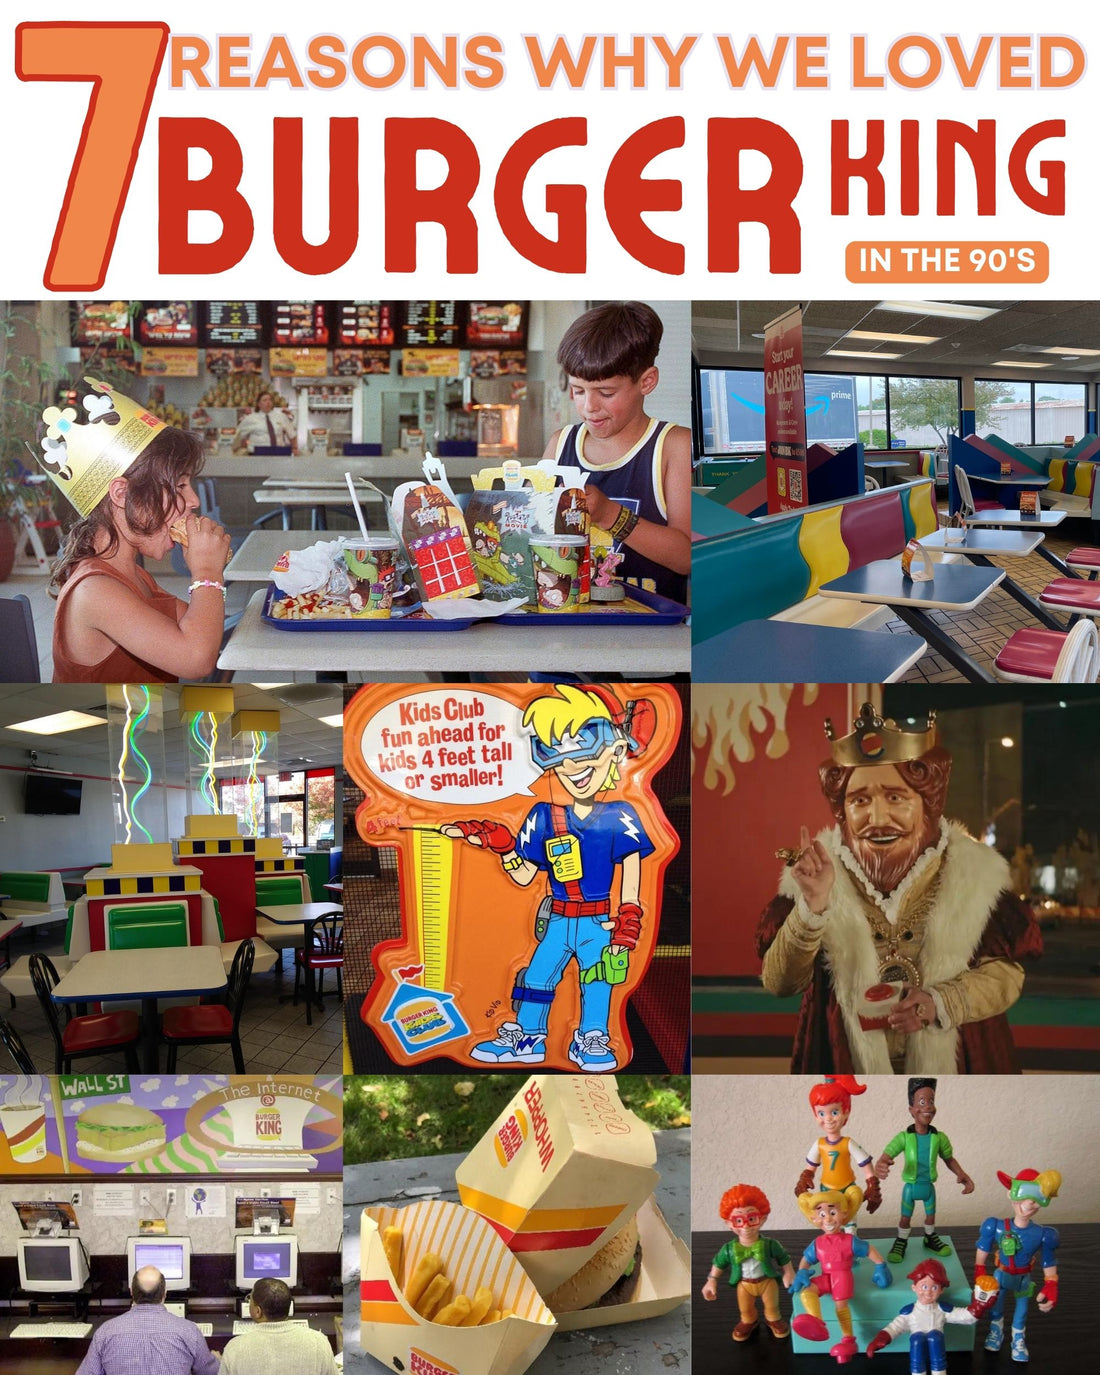 WHY WE LOVED BURGER KING IN THE 90’S